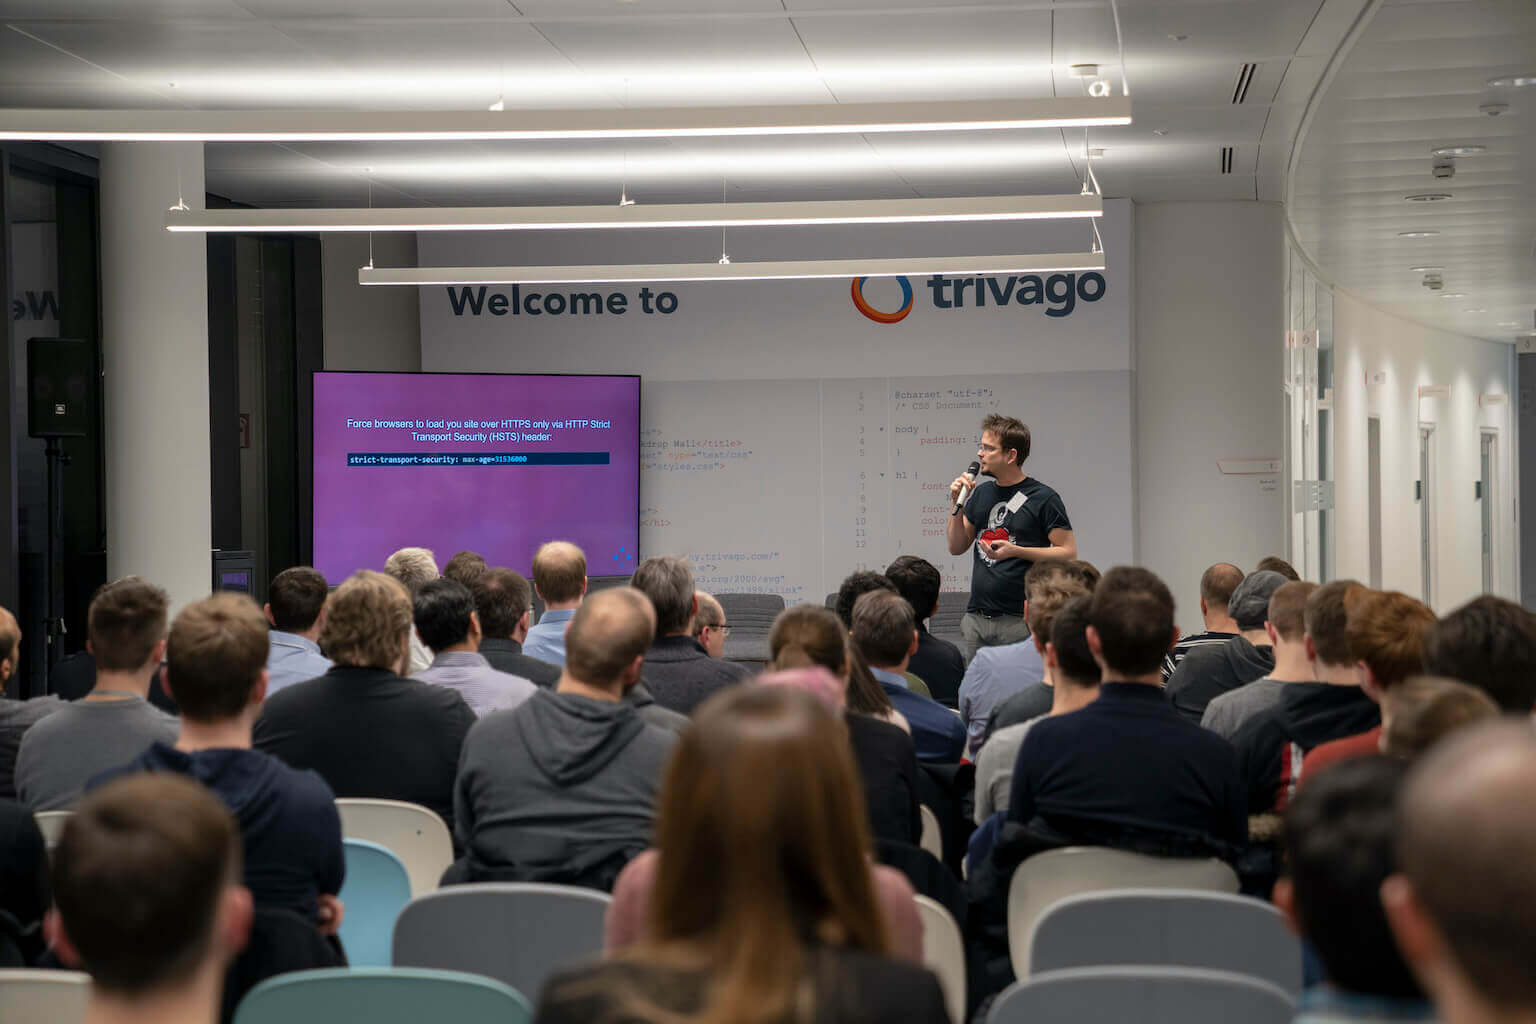 Web Engineering Düsseldorf Meetup at trivago in January 2019 with Christian Schaefer and Arndt Droullier